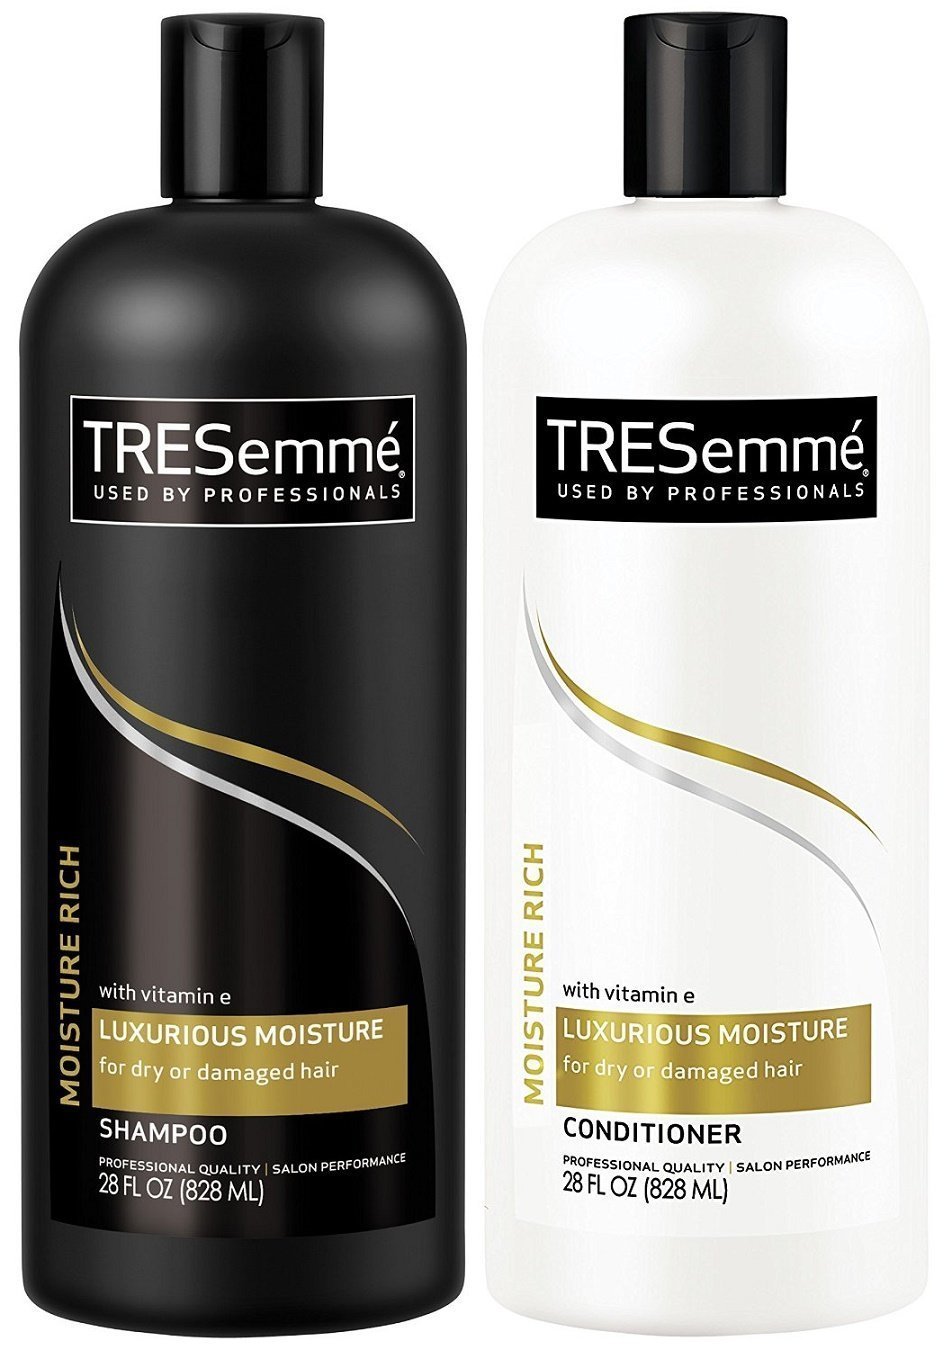 Tresemme Conditioners Reviews